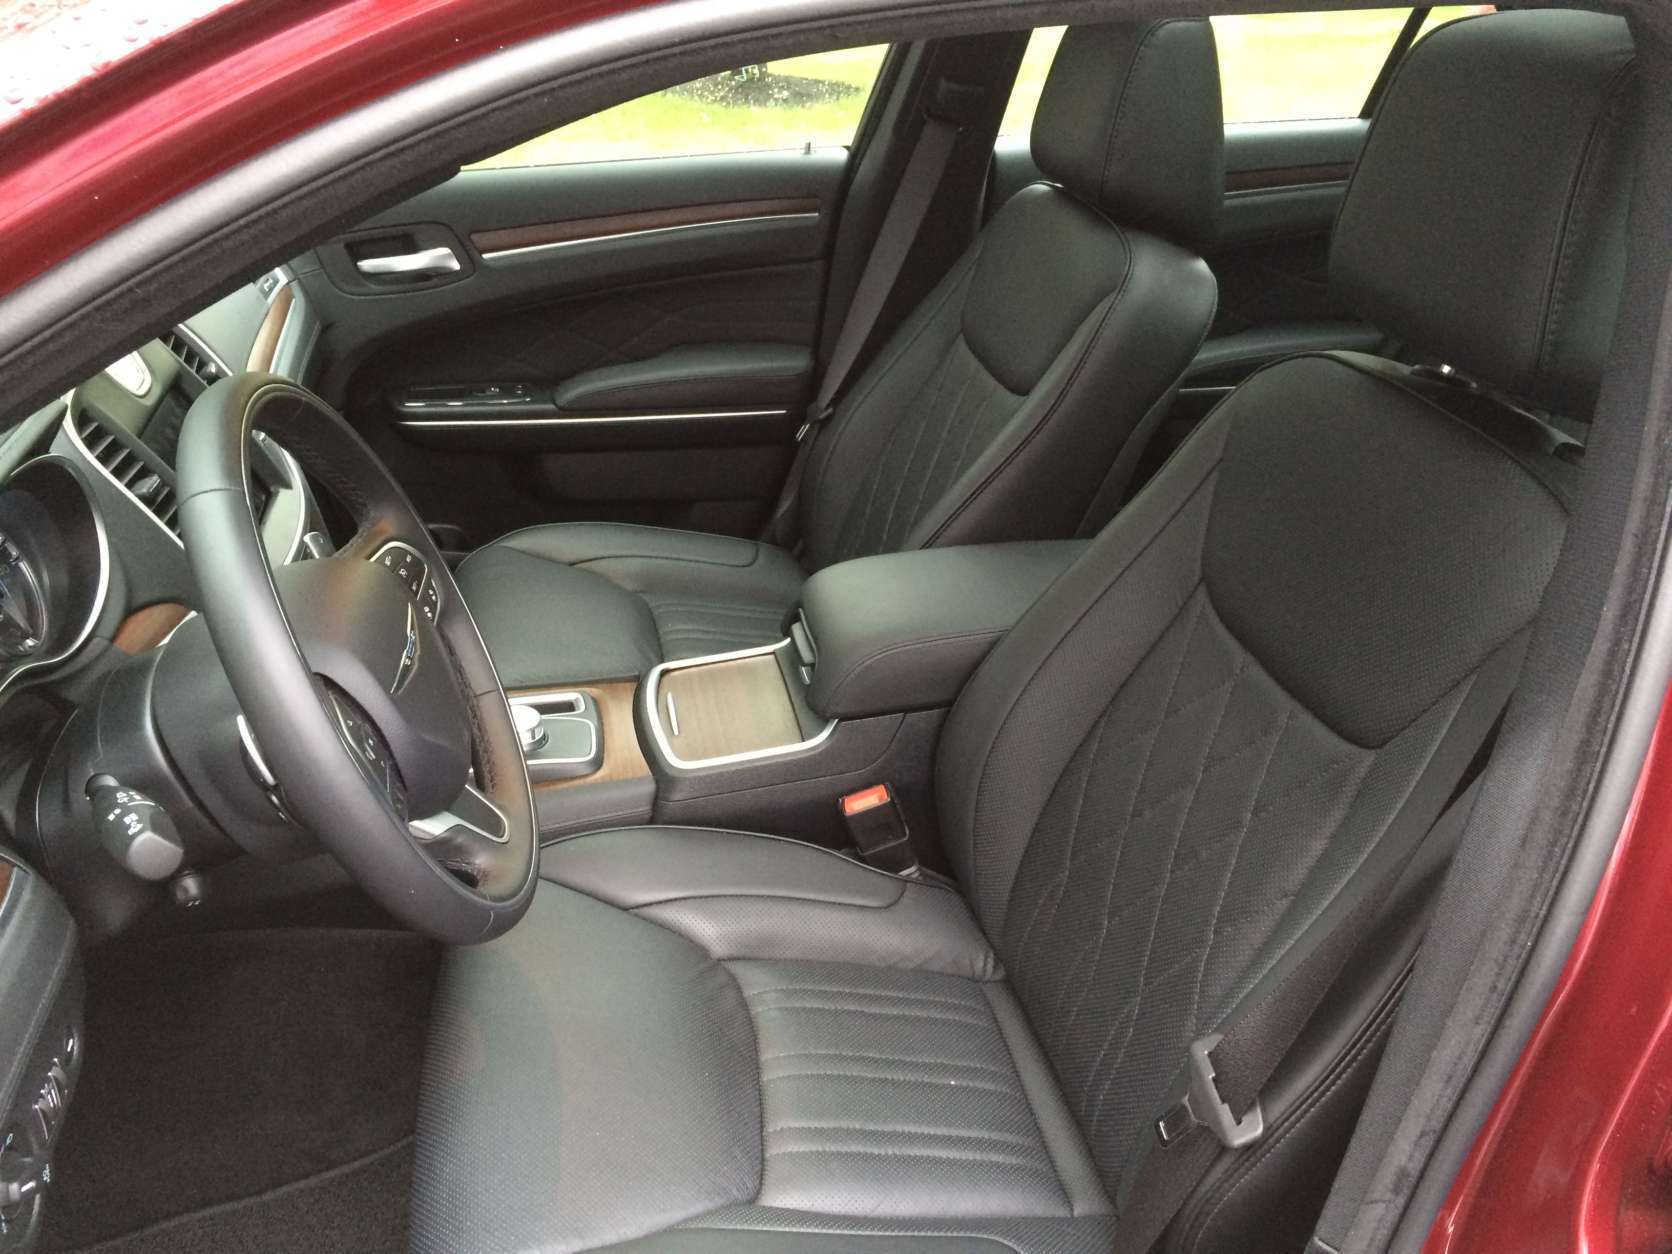 Leather seats are standard, heated and ventilated. They sit more like living room furniture with soft comfort rather than the firm sport seats that some sedans have. (WTOP/Mike Parris) 